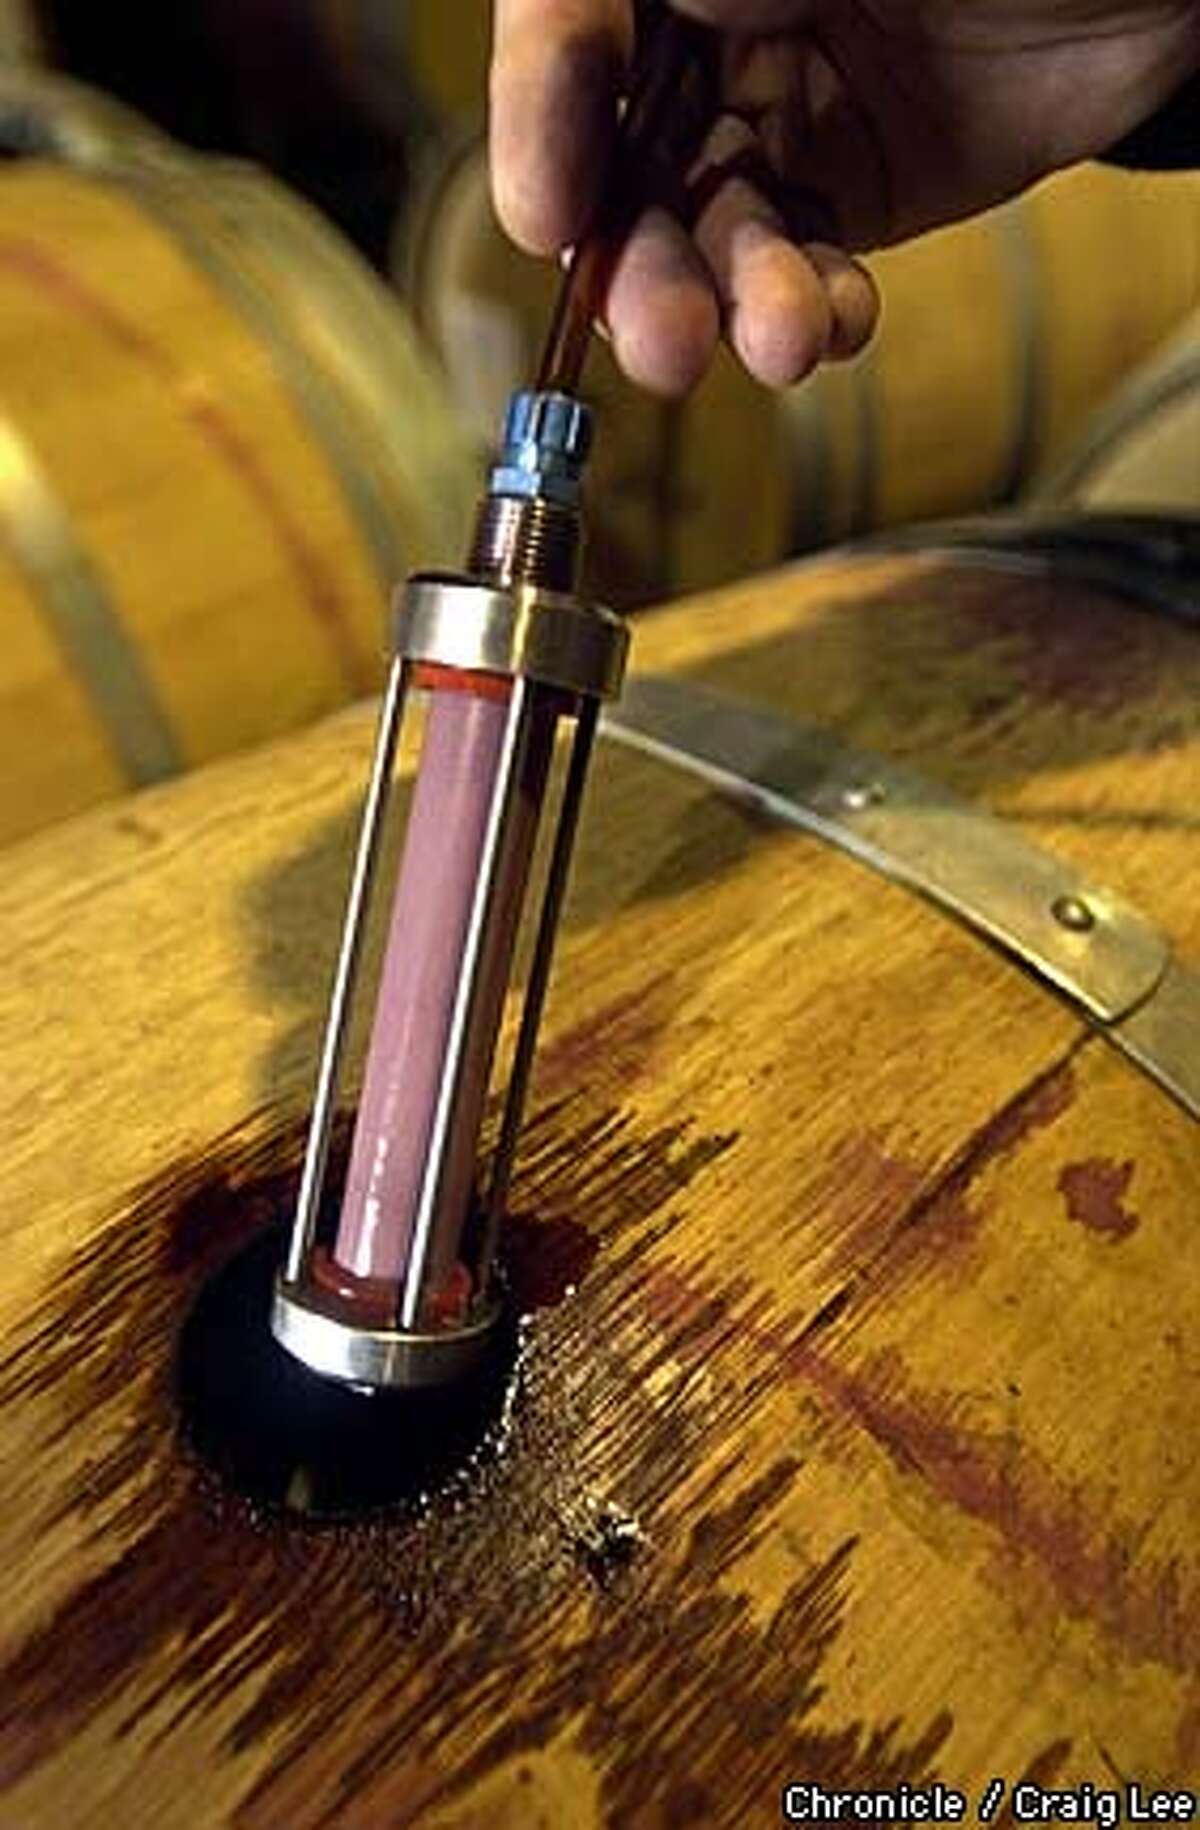 Michael Havens of Havens Wine Cellars in Napa is a pioneer in micro-oxygenation, designed to soften wine's tannins. Close-up photo of the oxygen diffuser that is submerged into the wine for micro-oxygenation. Photo by Craig Lee/San Francisco Chronicle